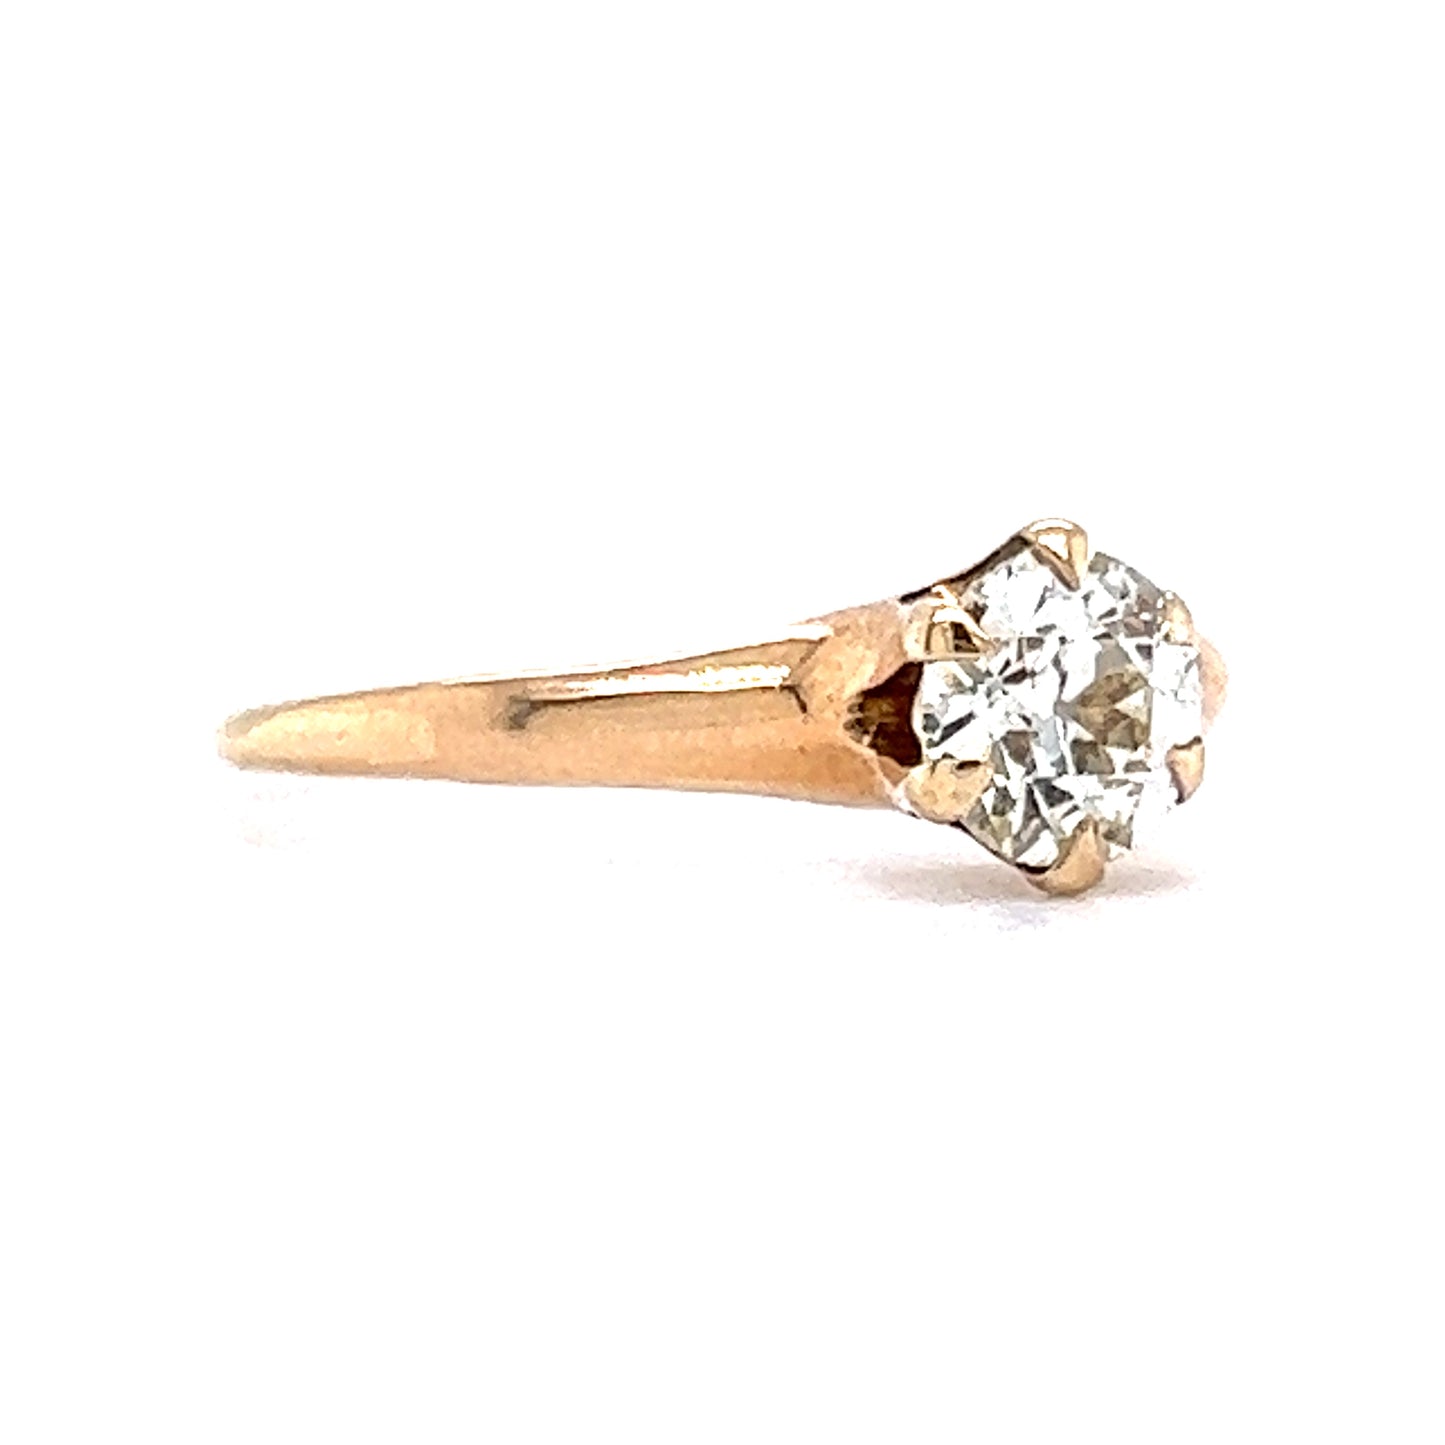 Solitaire Victorian .60 Diamond Engagement Ring in 14k Yellow Gold